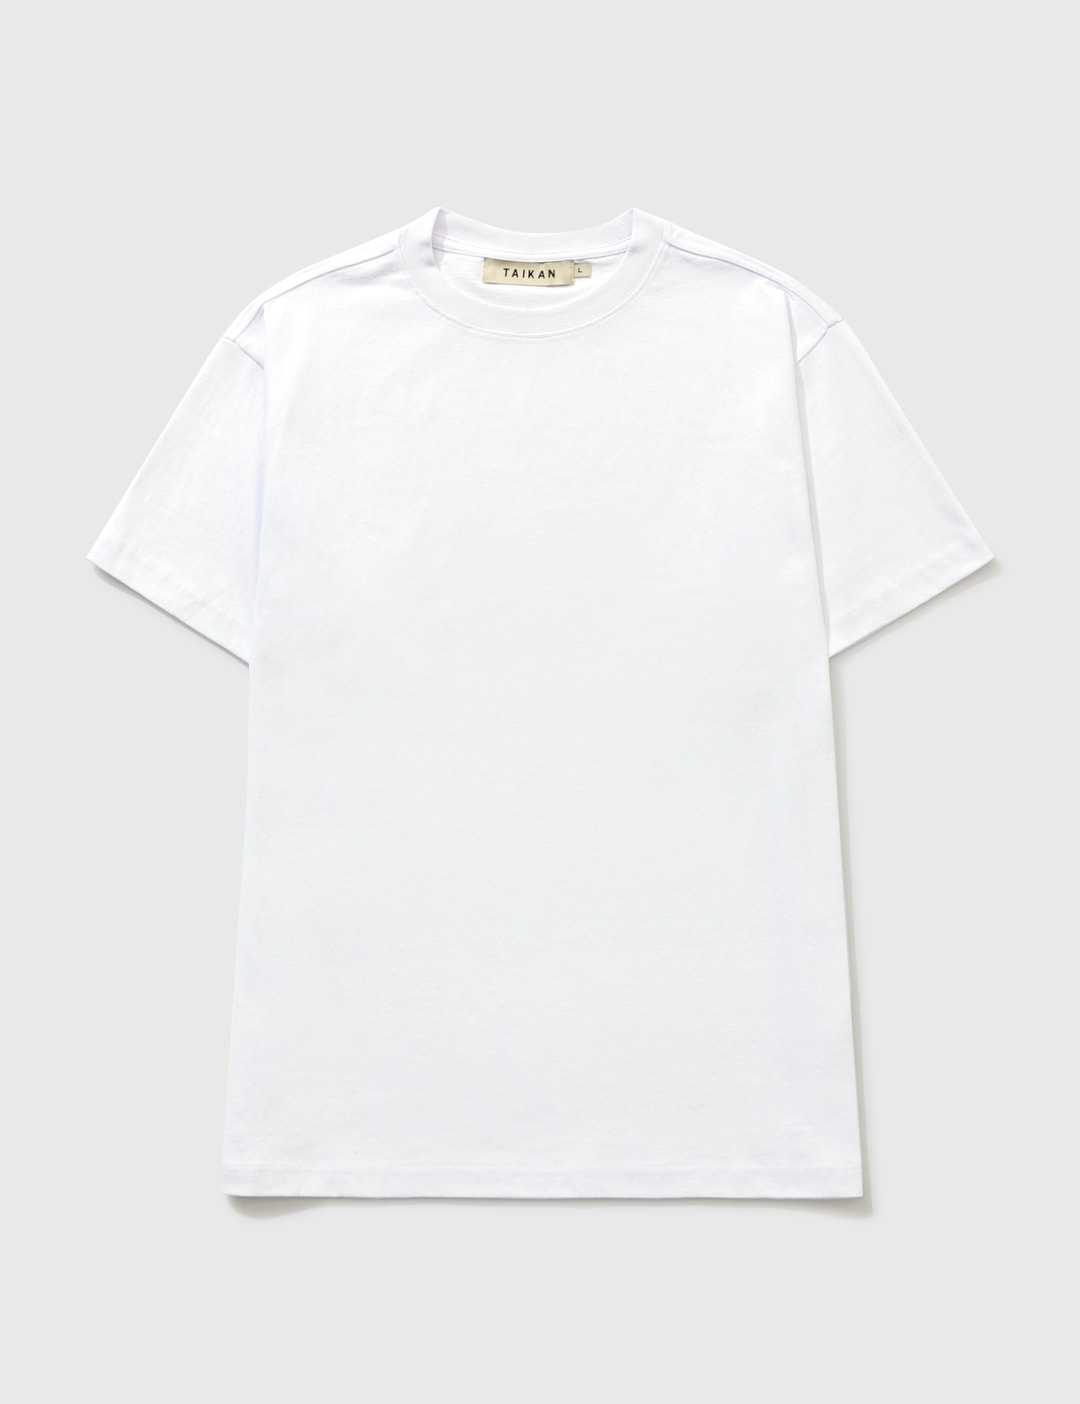 Taikan - Plain T-shirt | HBX - Globally Curated Fashion and Lifestyle ...